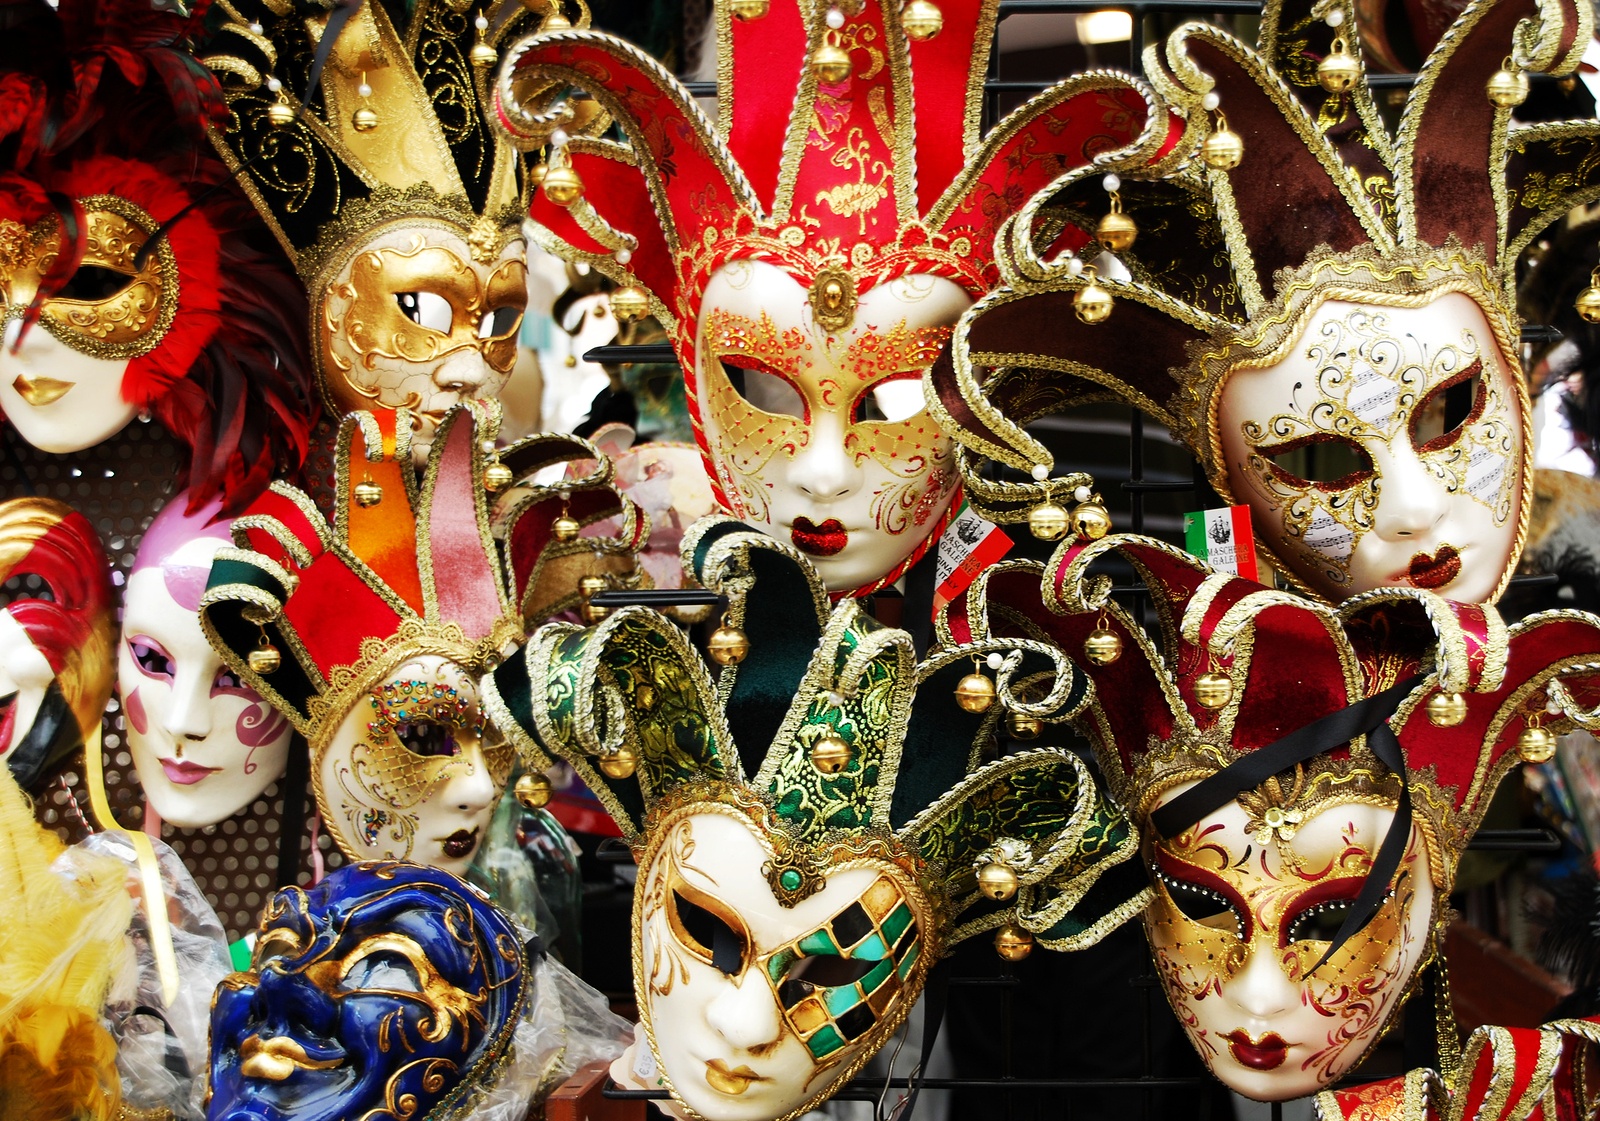 bigstock-A-Lot-Of-Carnival-Masks-For-Th-263399530